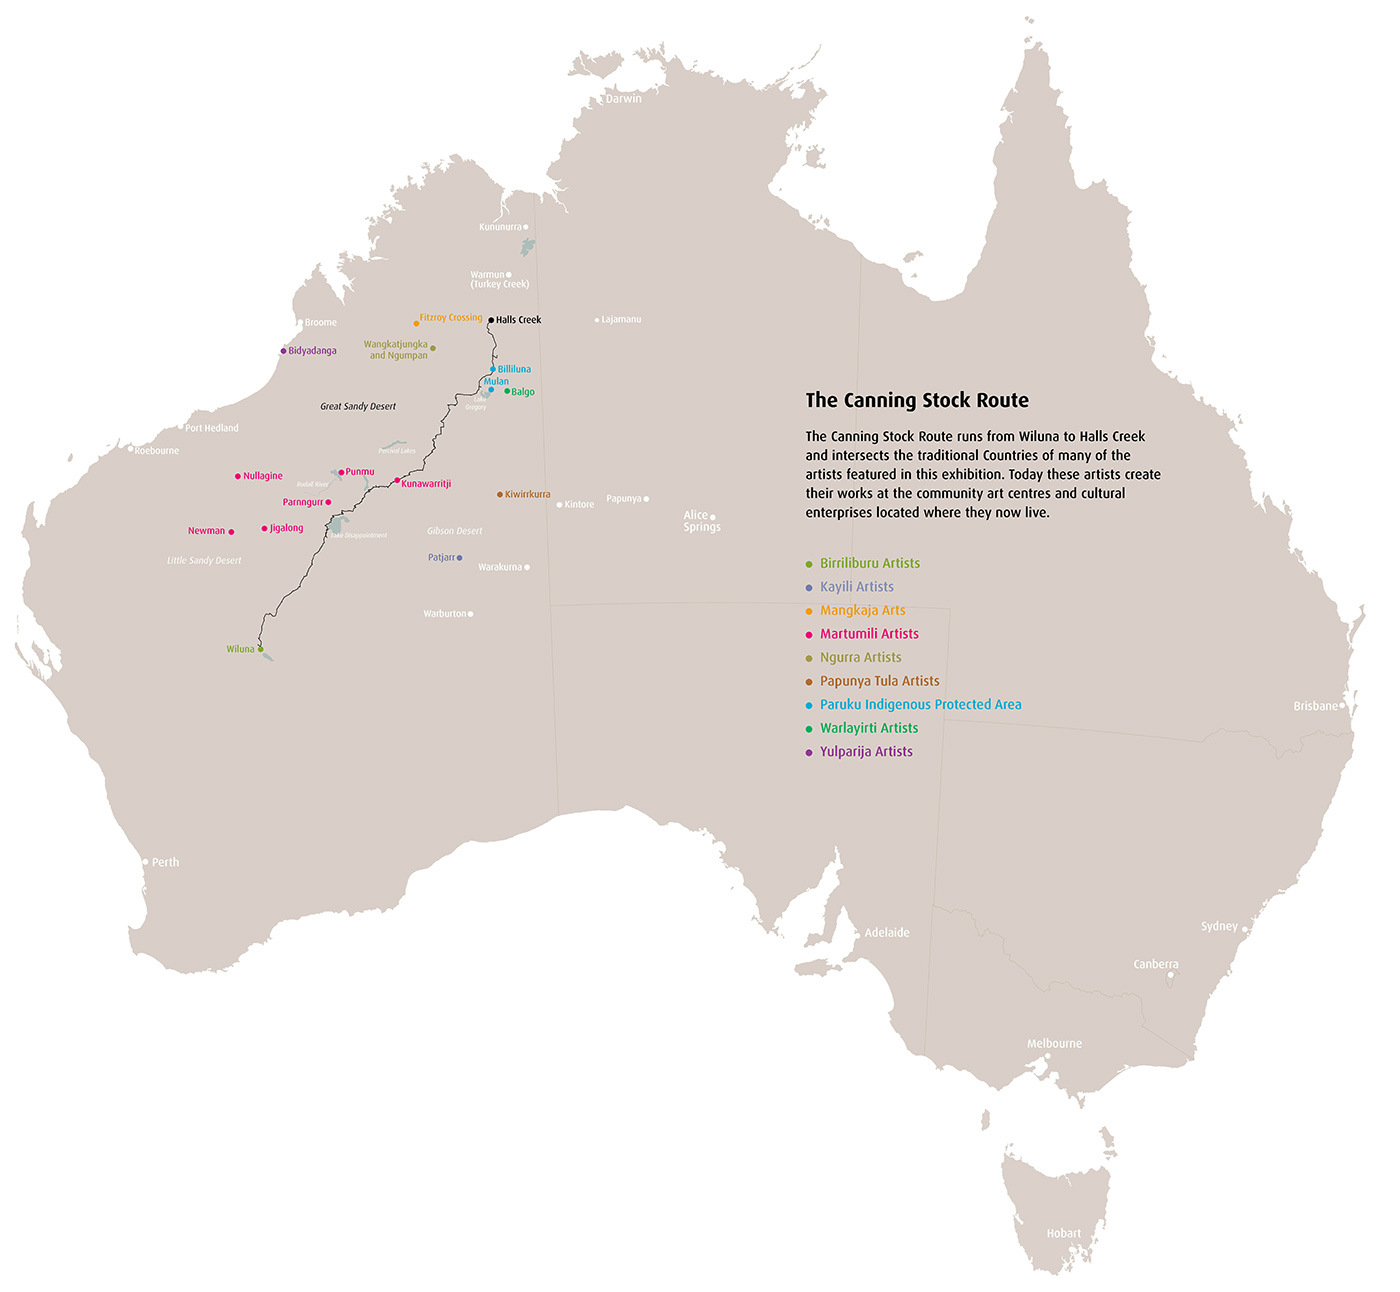 Map of Australia featuring The Canning Stock Route and a list of the artists.